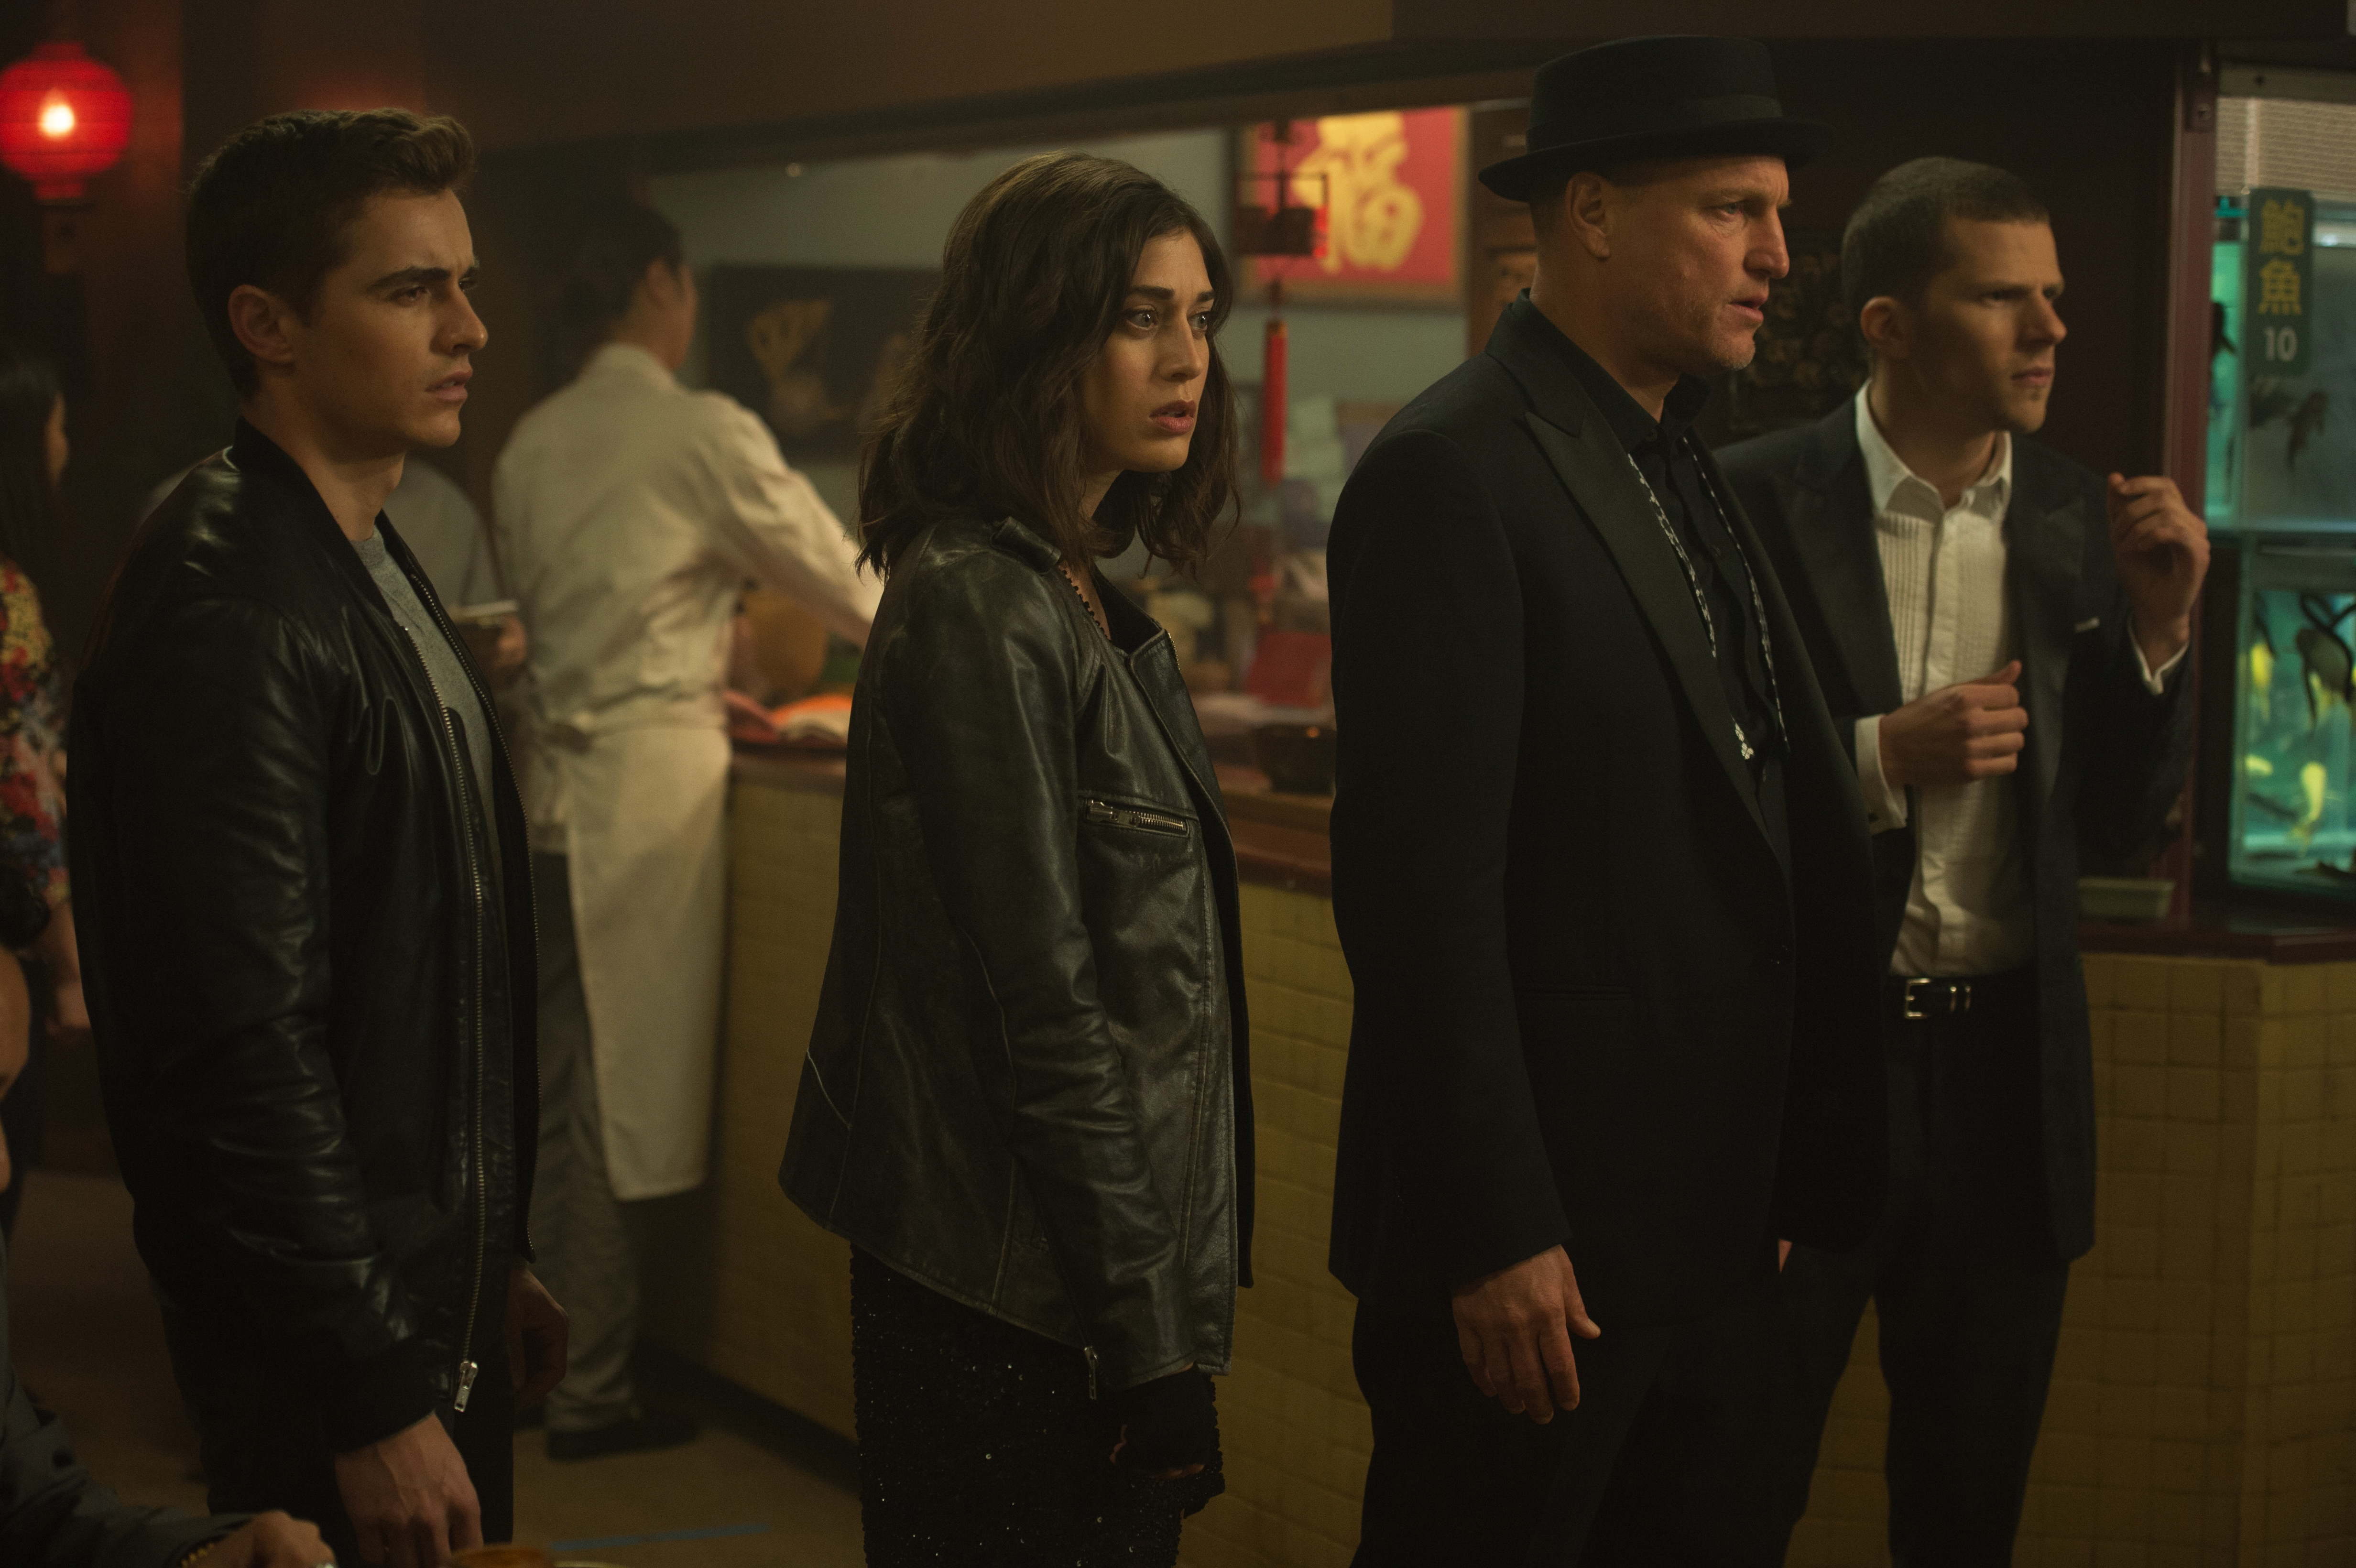 Movie Now You See Me 2 4k Ultra HD Wallpaper